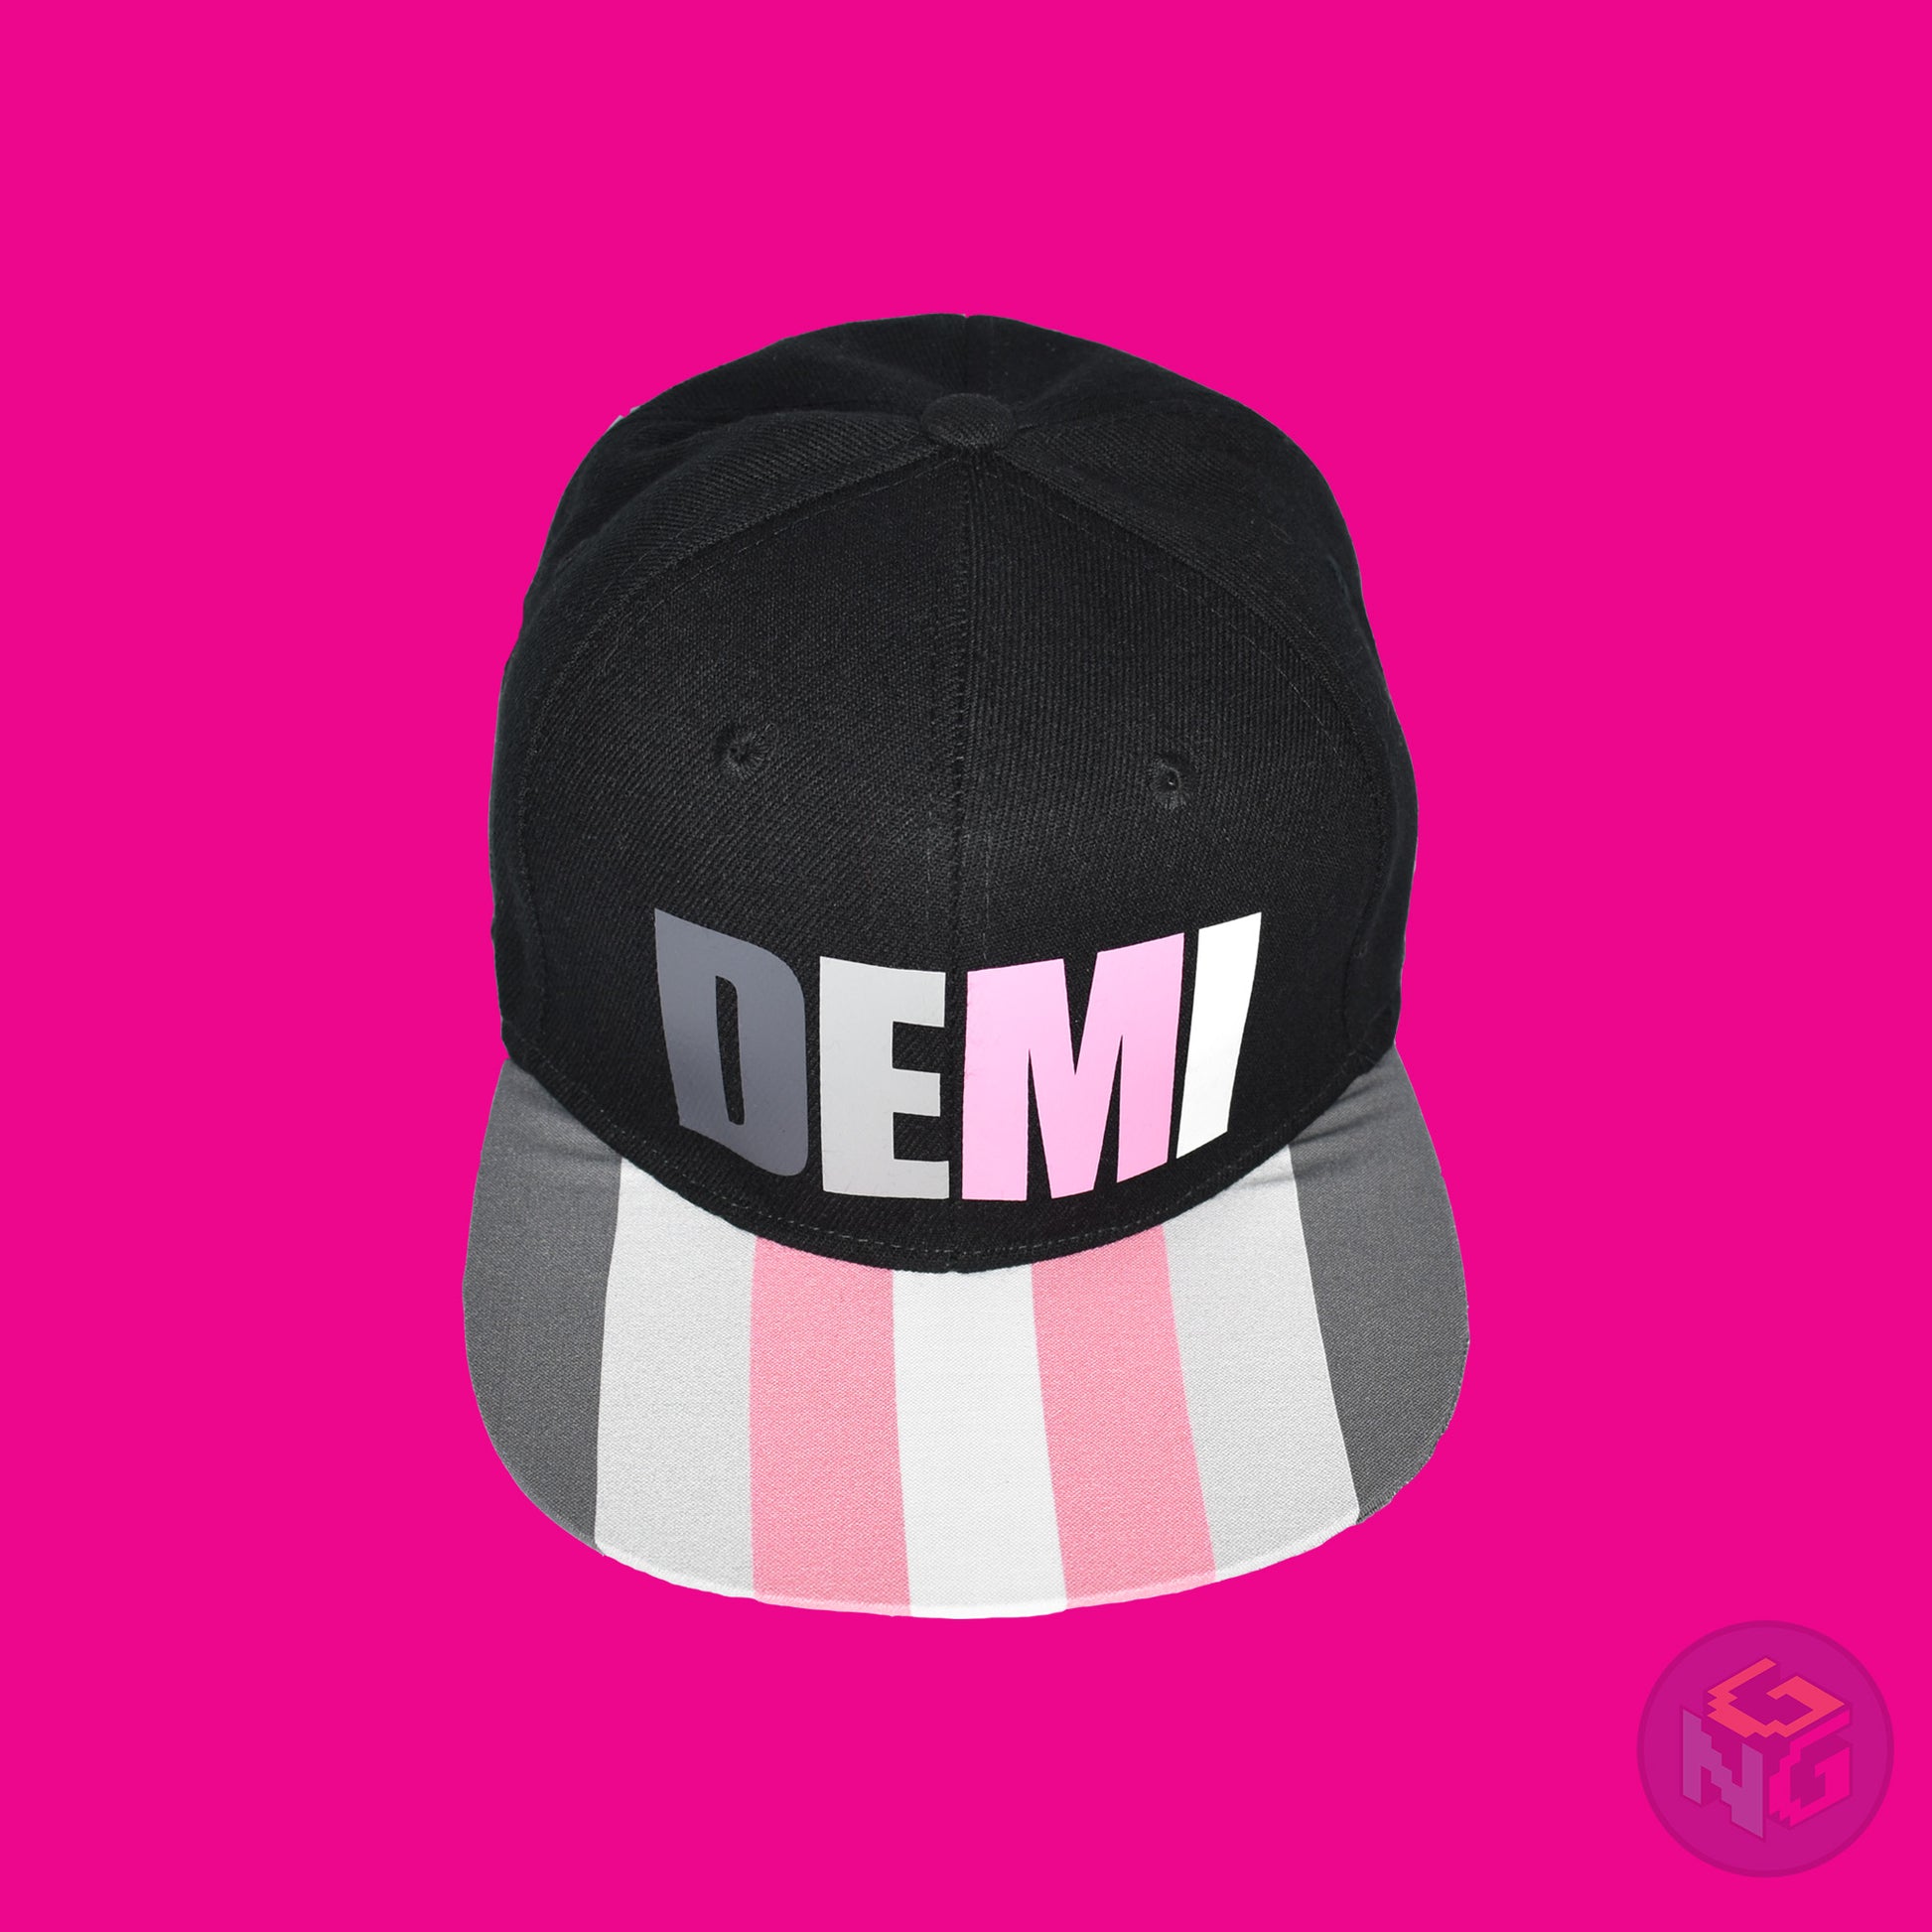 Black flat bill snapback hat. The brim has the demigirl pride flag on both sides and the front of the hat has the word “DEMI” in dark grey, light grey, pink, and white. Front top view